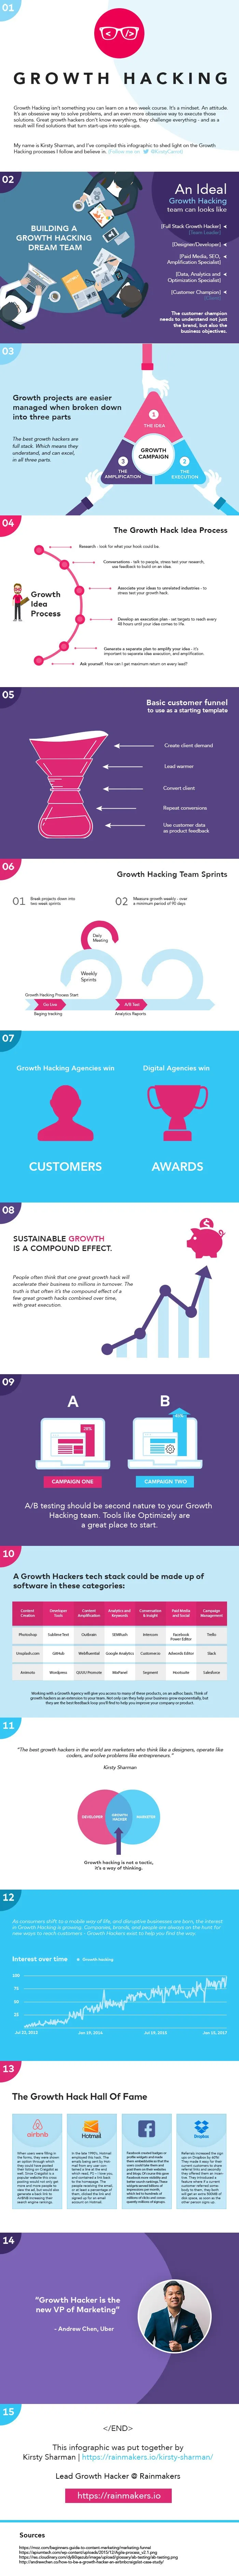 A Definitive Guide To Growth Hacking - #infographic